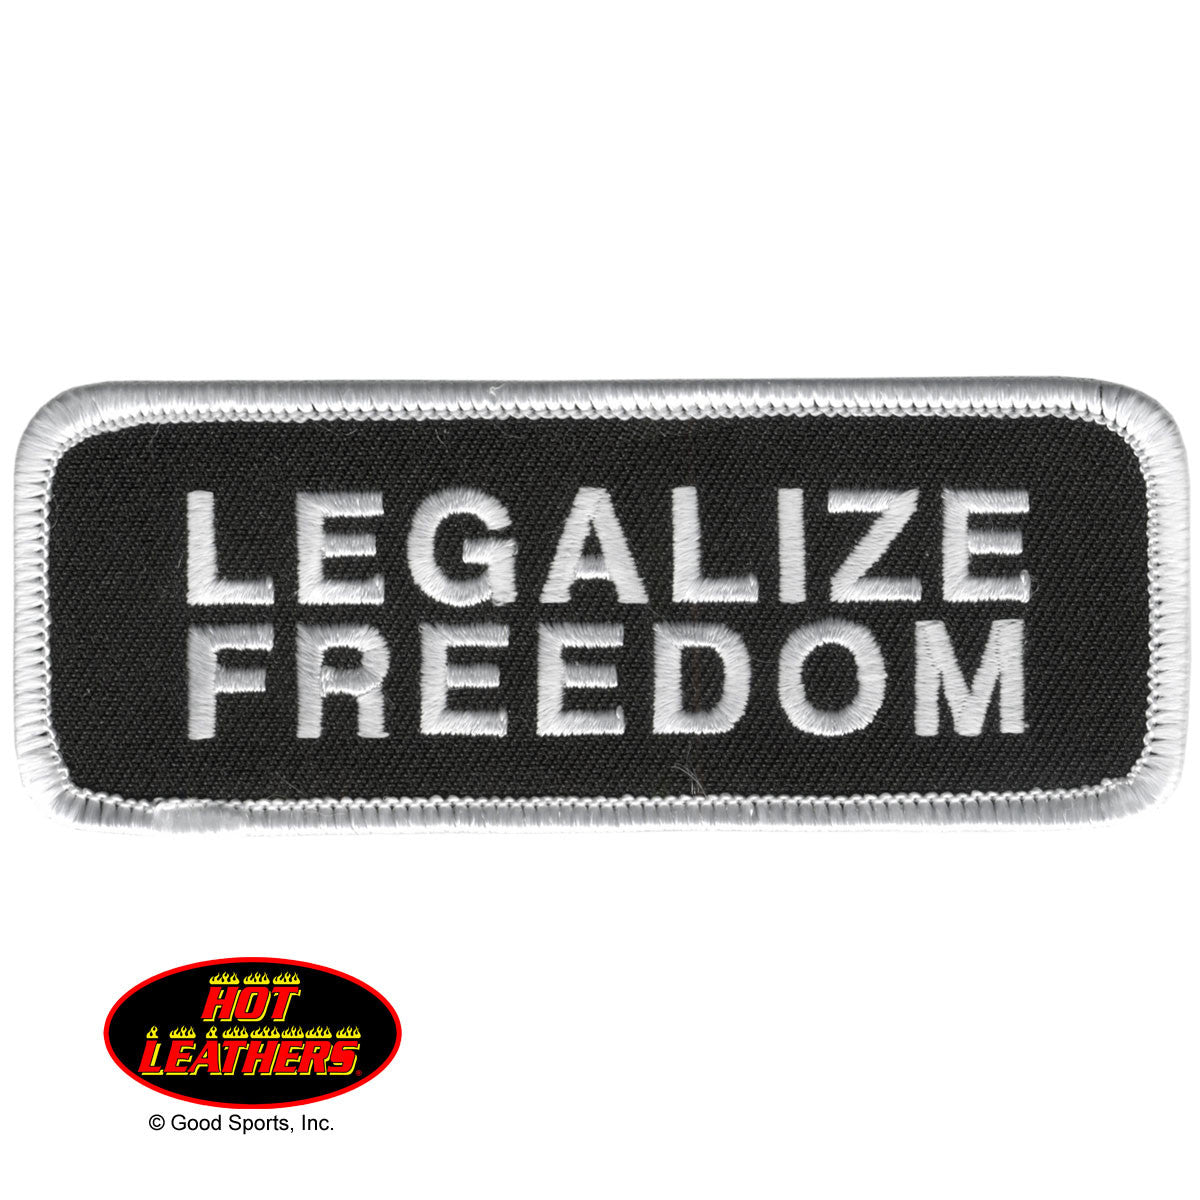 Legalize Freedom - Maine-Line Leather